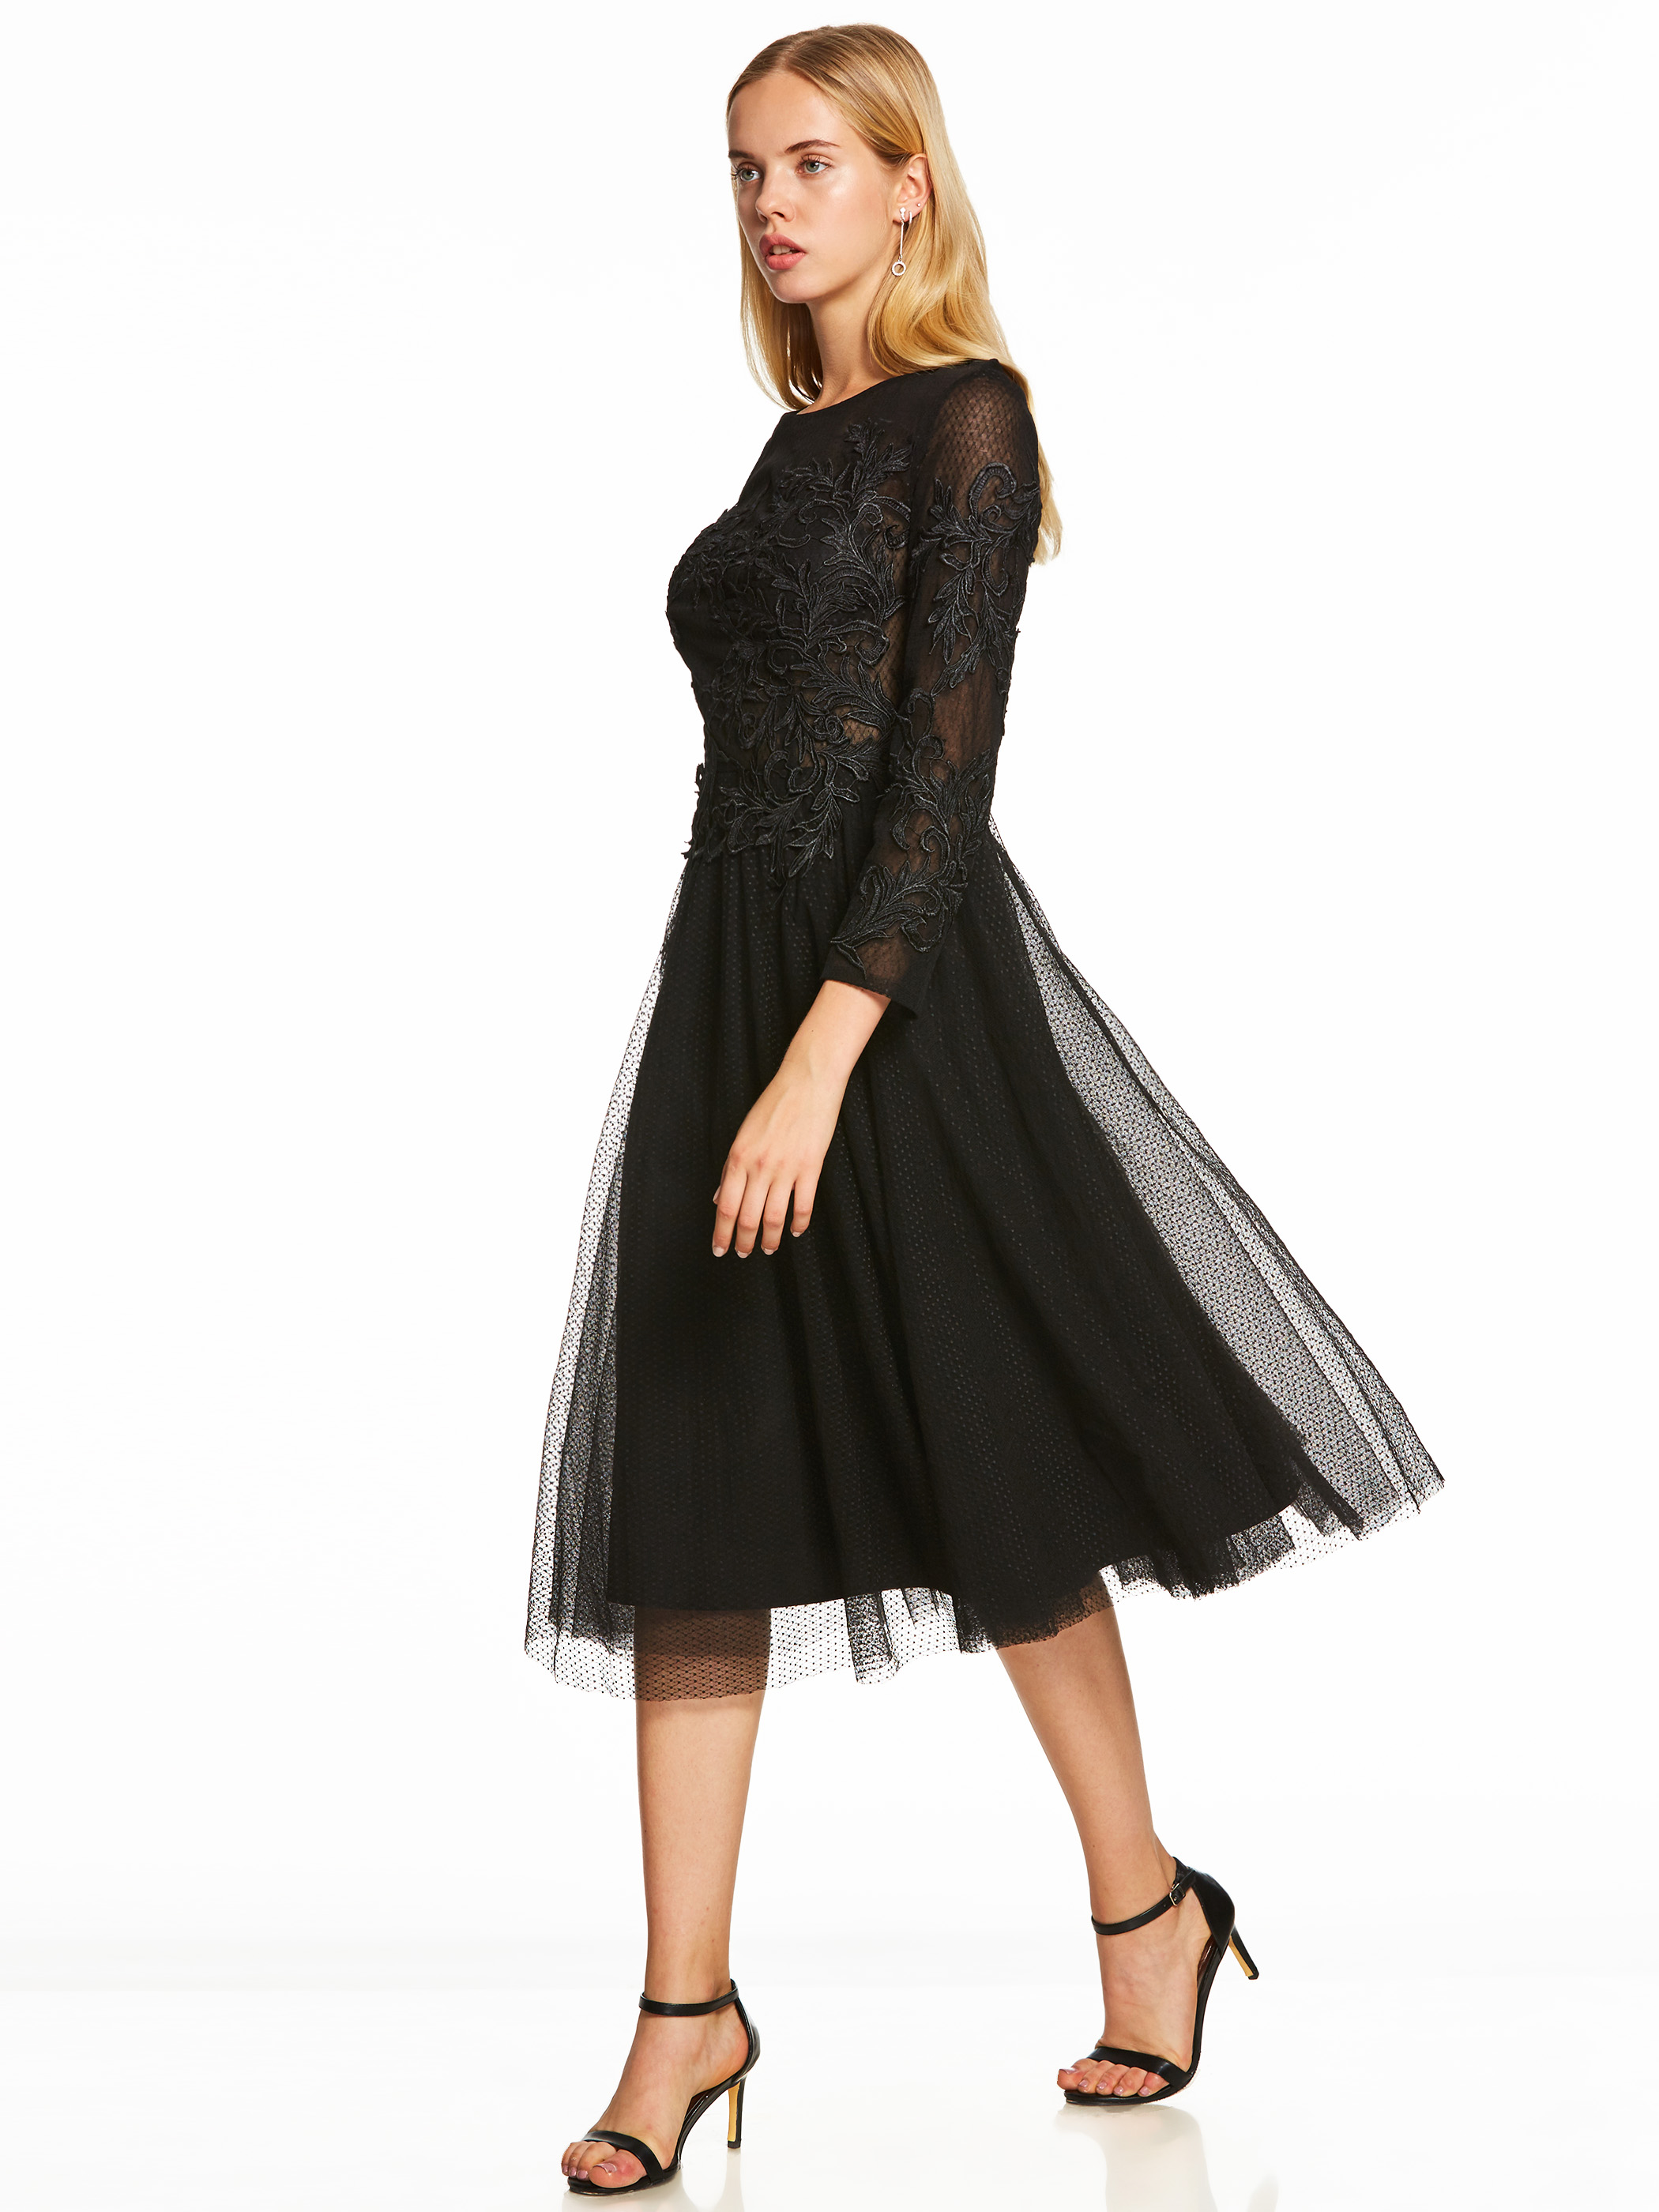 A Line Cocktail Dress Black Scoop Long Sleeves Tea Length Gown Cheap Lady Party Homecoming Formal Short Cocktail Dresses